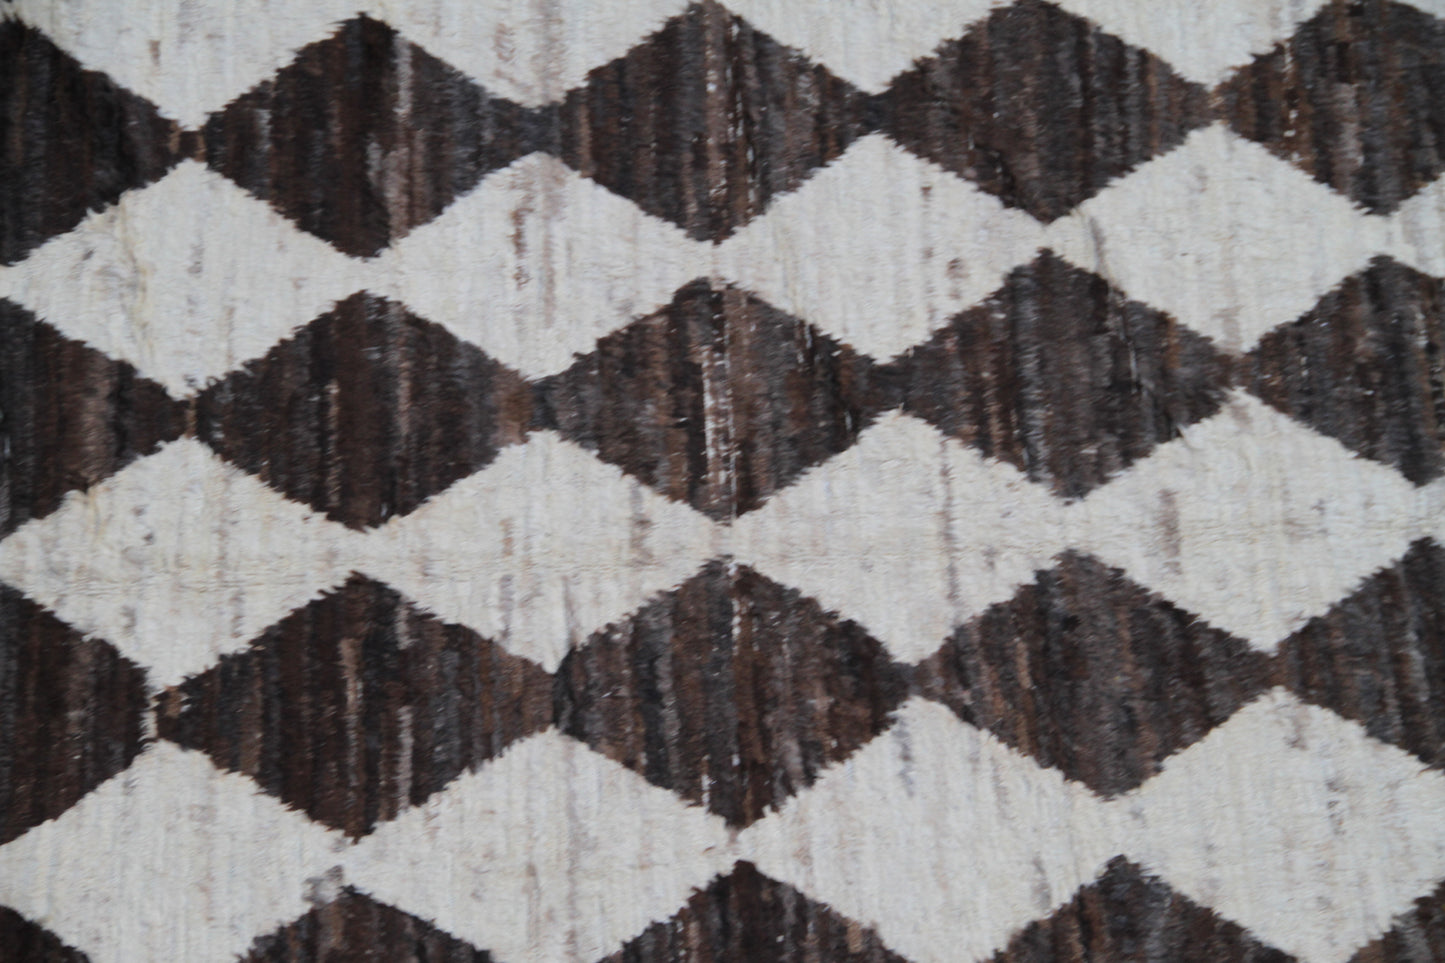 9'x11' Ariana Moroccan Style Brown and Ivory Diamond Checkered Pattern Barchi Area Rug